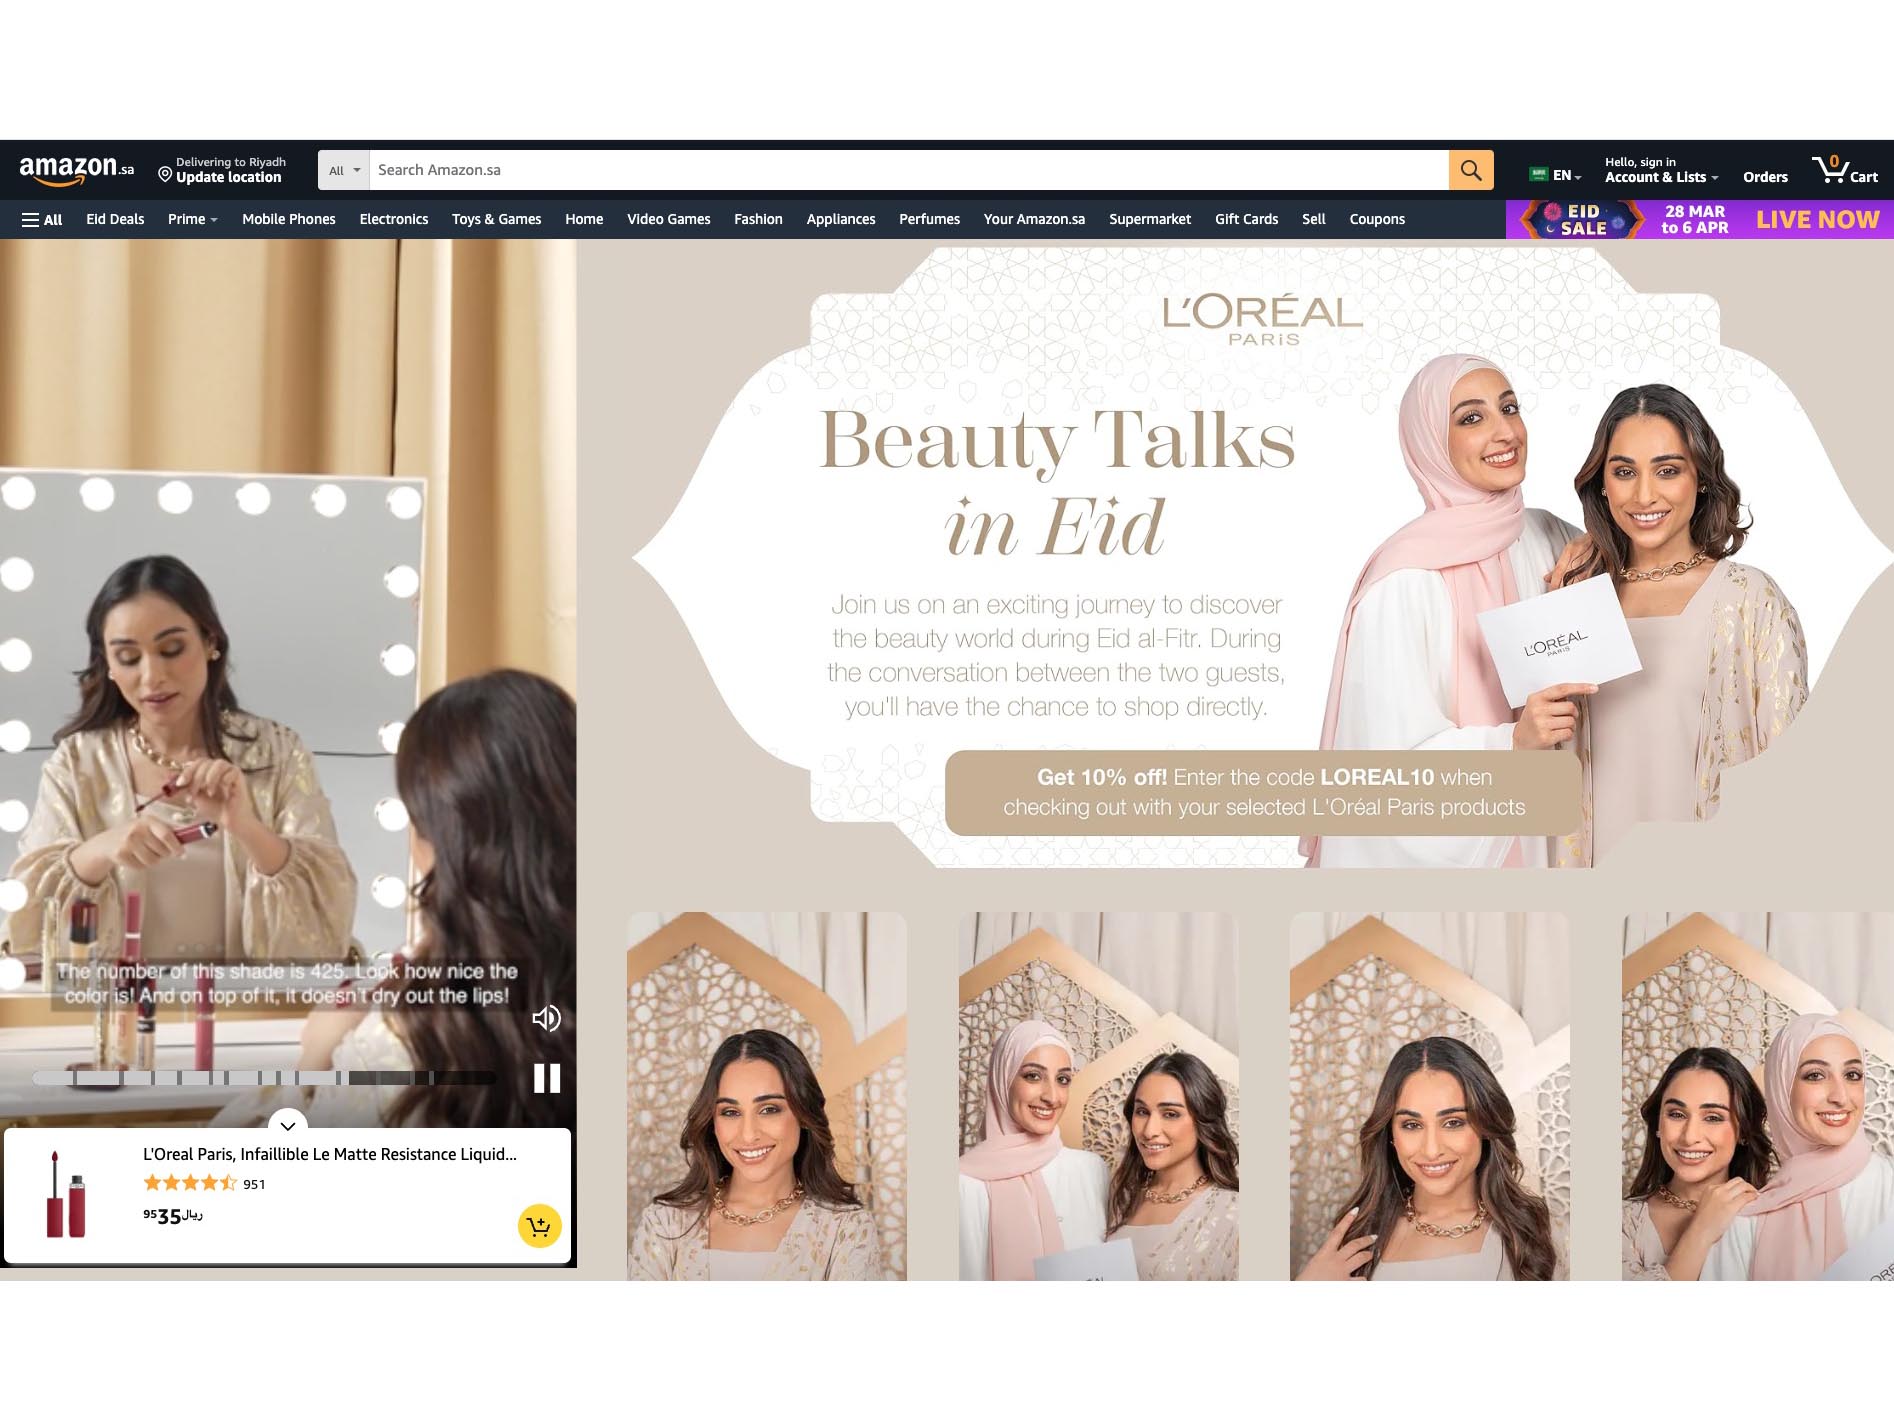 L'Oréal Paris and VML ace it with the region's first-ever live shopping event on Amazon ME